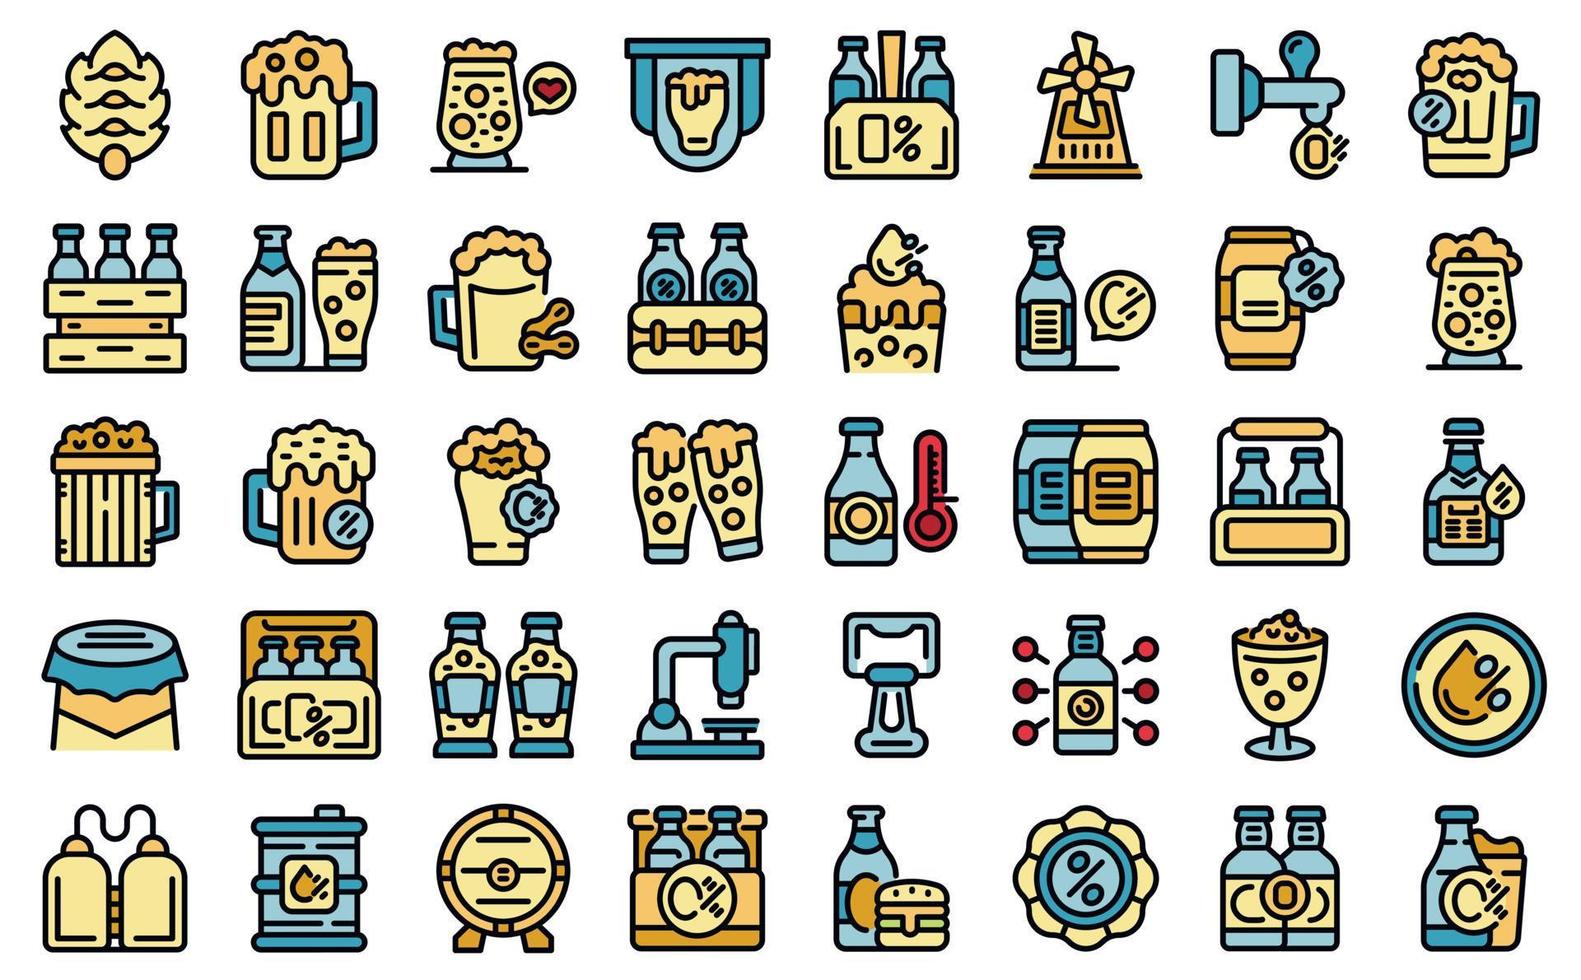 Nonalcoholic beer icons set vector flat